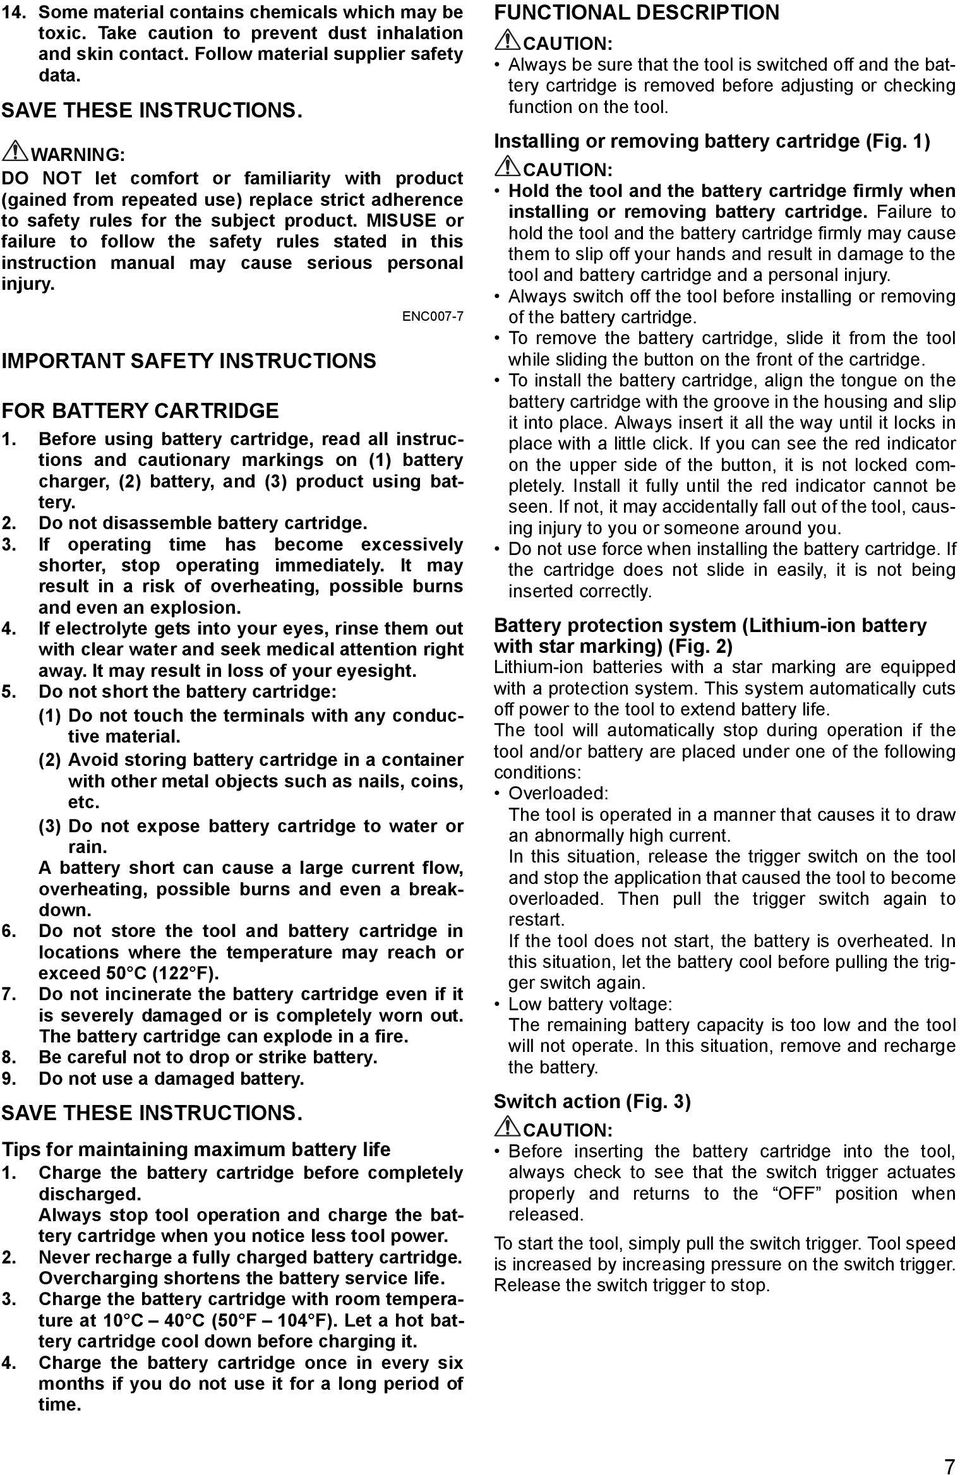 MISUSE or failure to follow the safety rules stated in this instruction manual may cause serious personal injury. IMPORTANT SAFETY INSTRUCTIONS ENC007-7 FOR BATTERY CARTRIDGE 1.